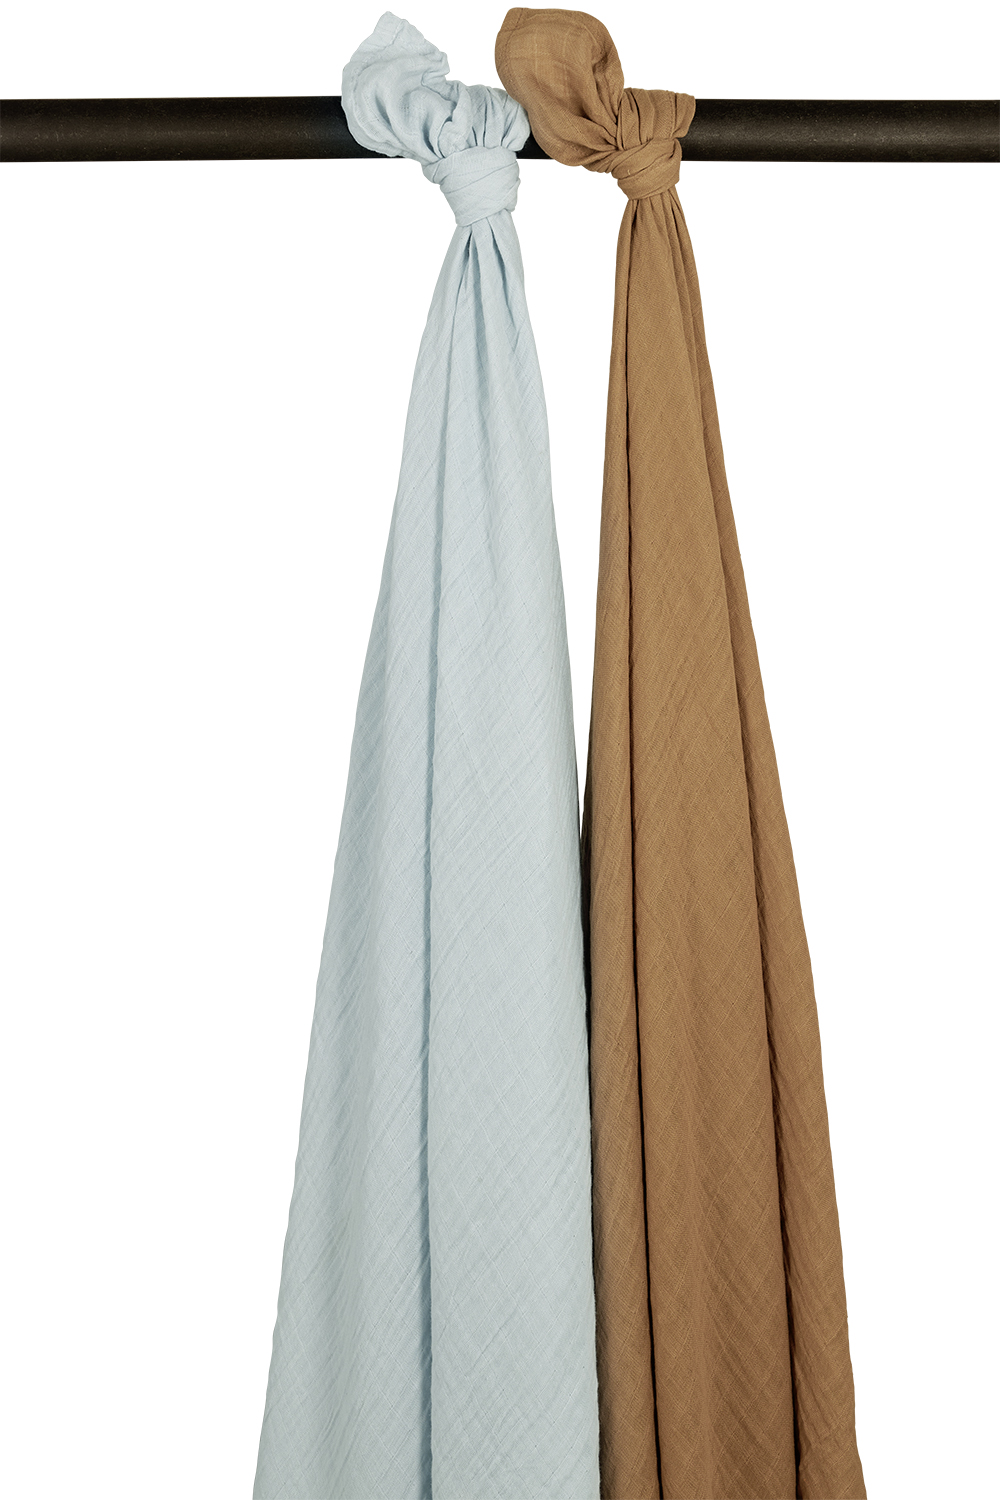 Swaddle  2er pack pre-washed musselin Uni - light blue/toffee - 120x120cm